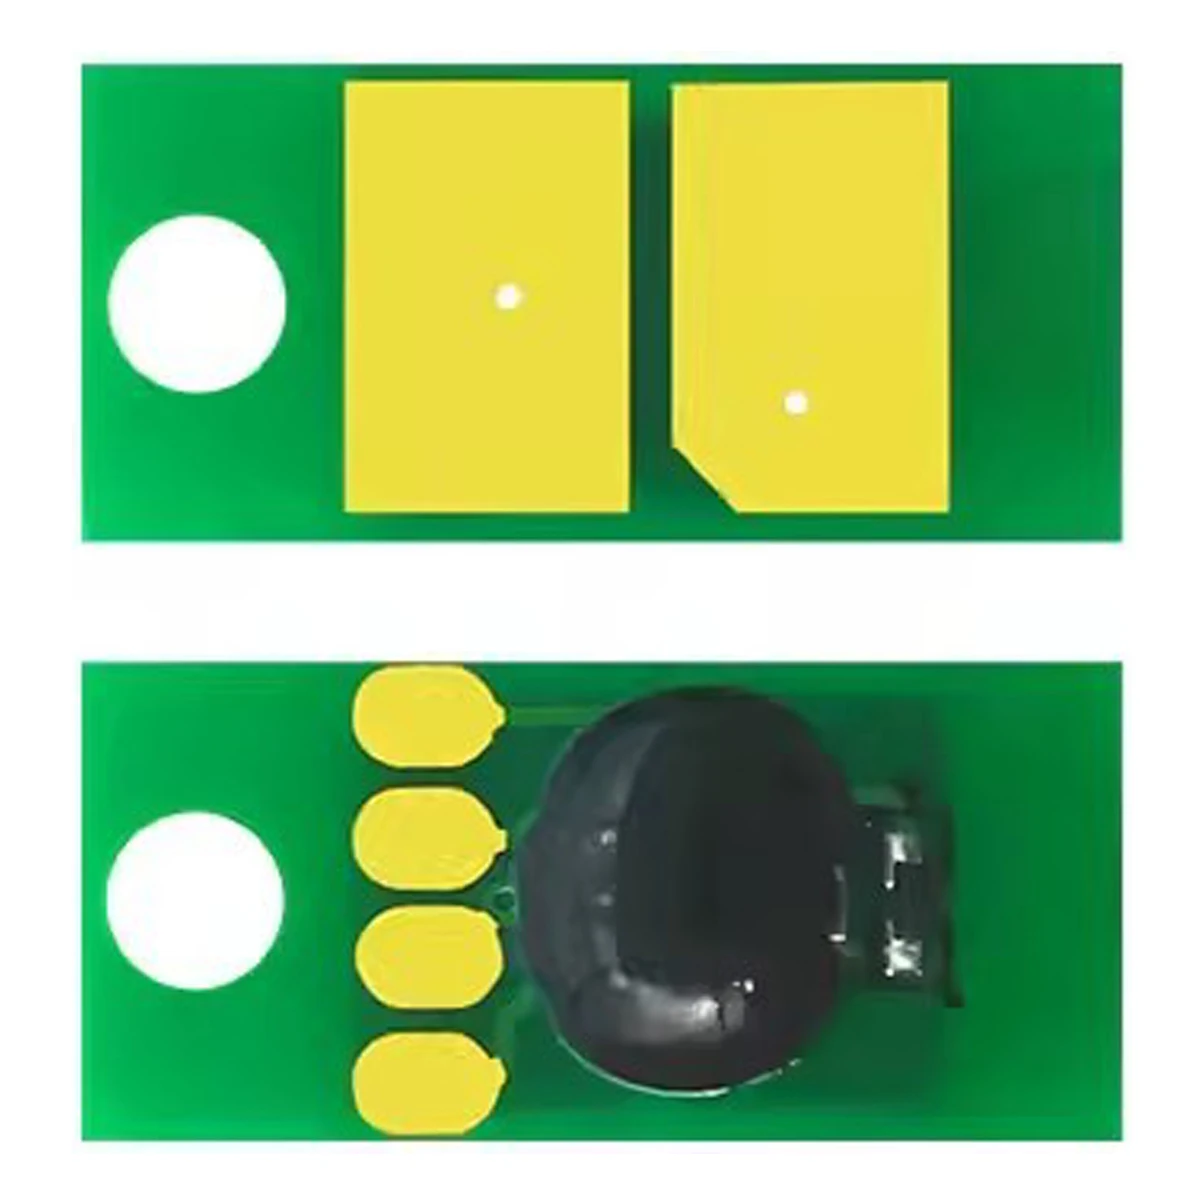 

Image Imaging Unit Drum Chip FOR Canon ImageRunner Advance DX C-356 iF II C-356 iF III C-356 P C-257 i C-257 iF C-357 i C-357 iF